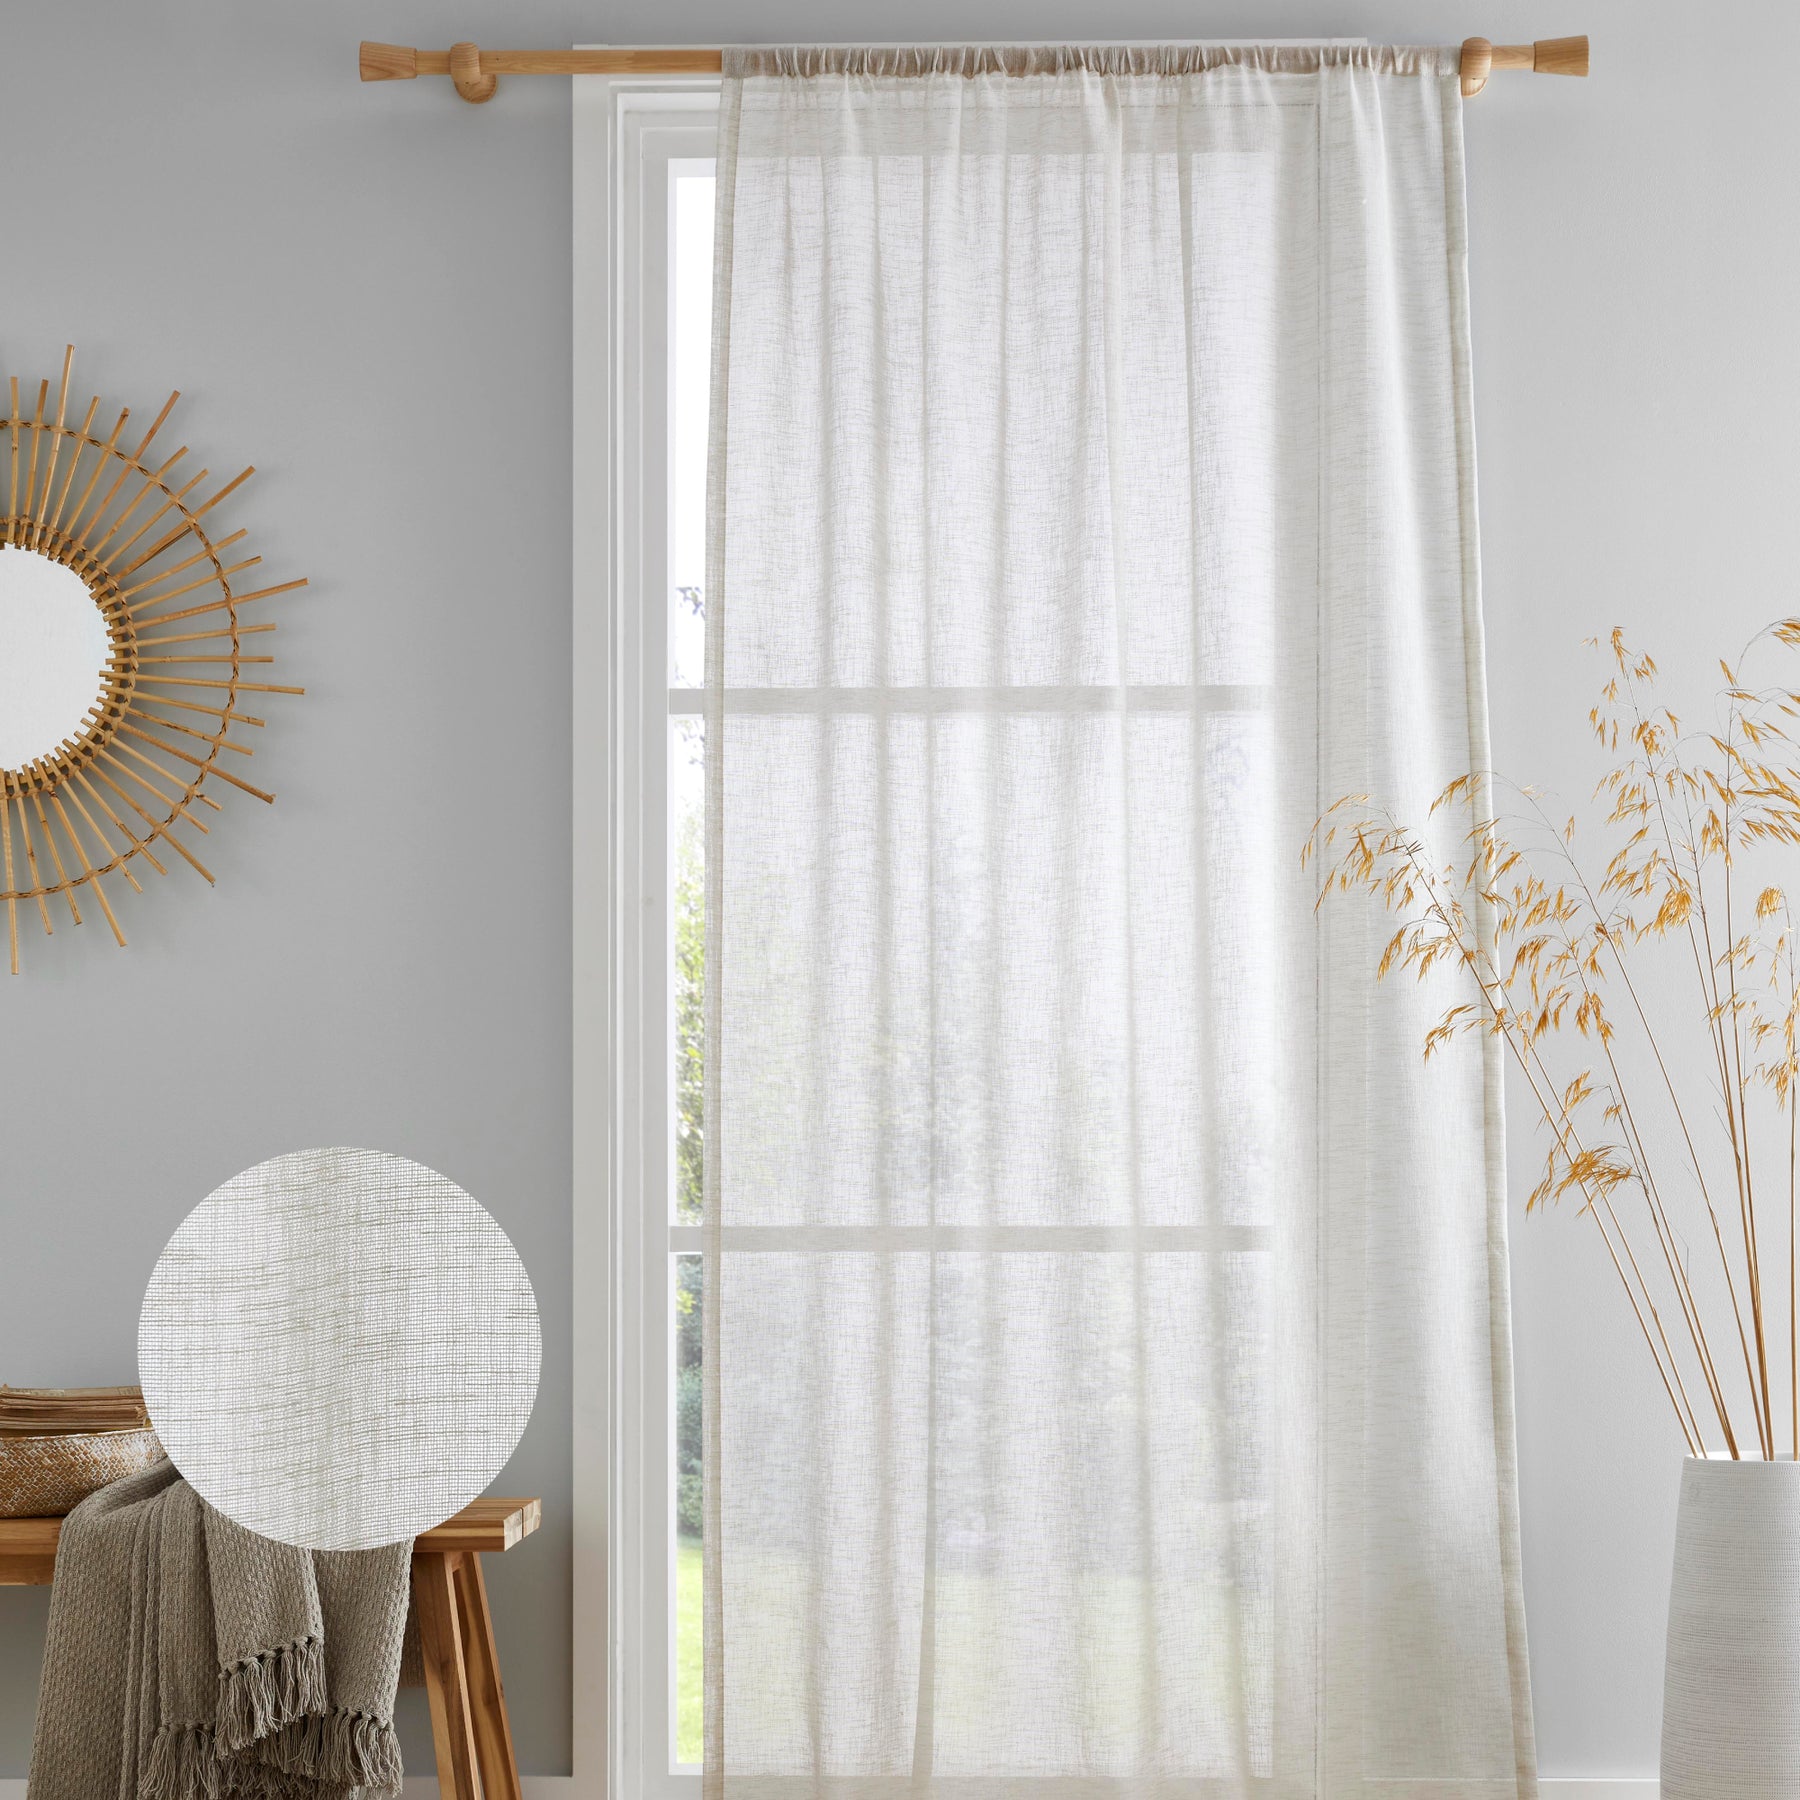 Kayla Ready Made Slot Top Voile Panel Natural